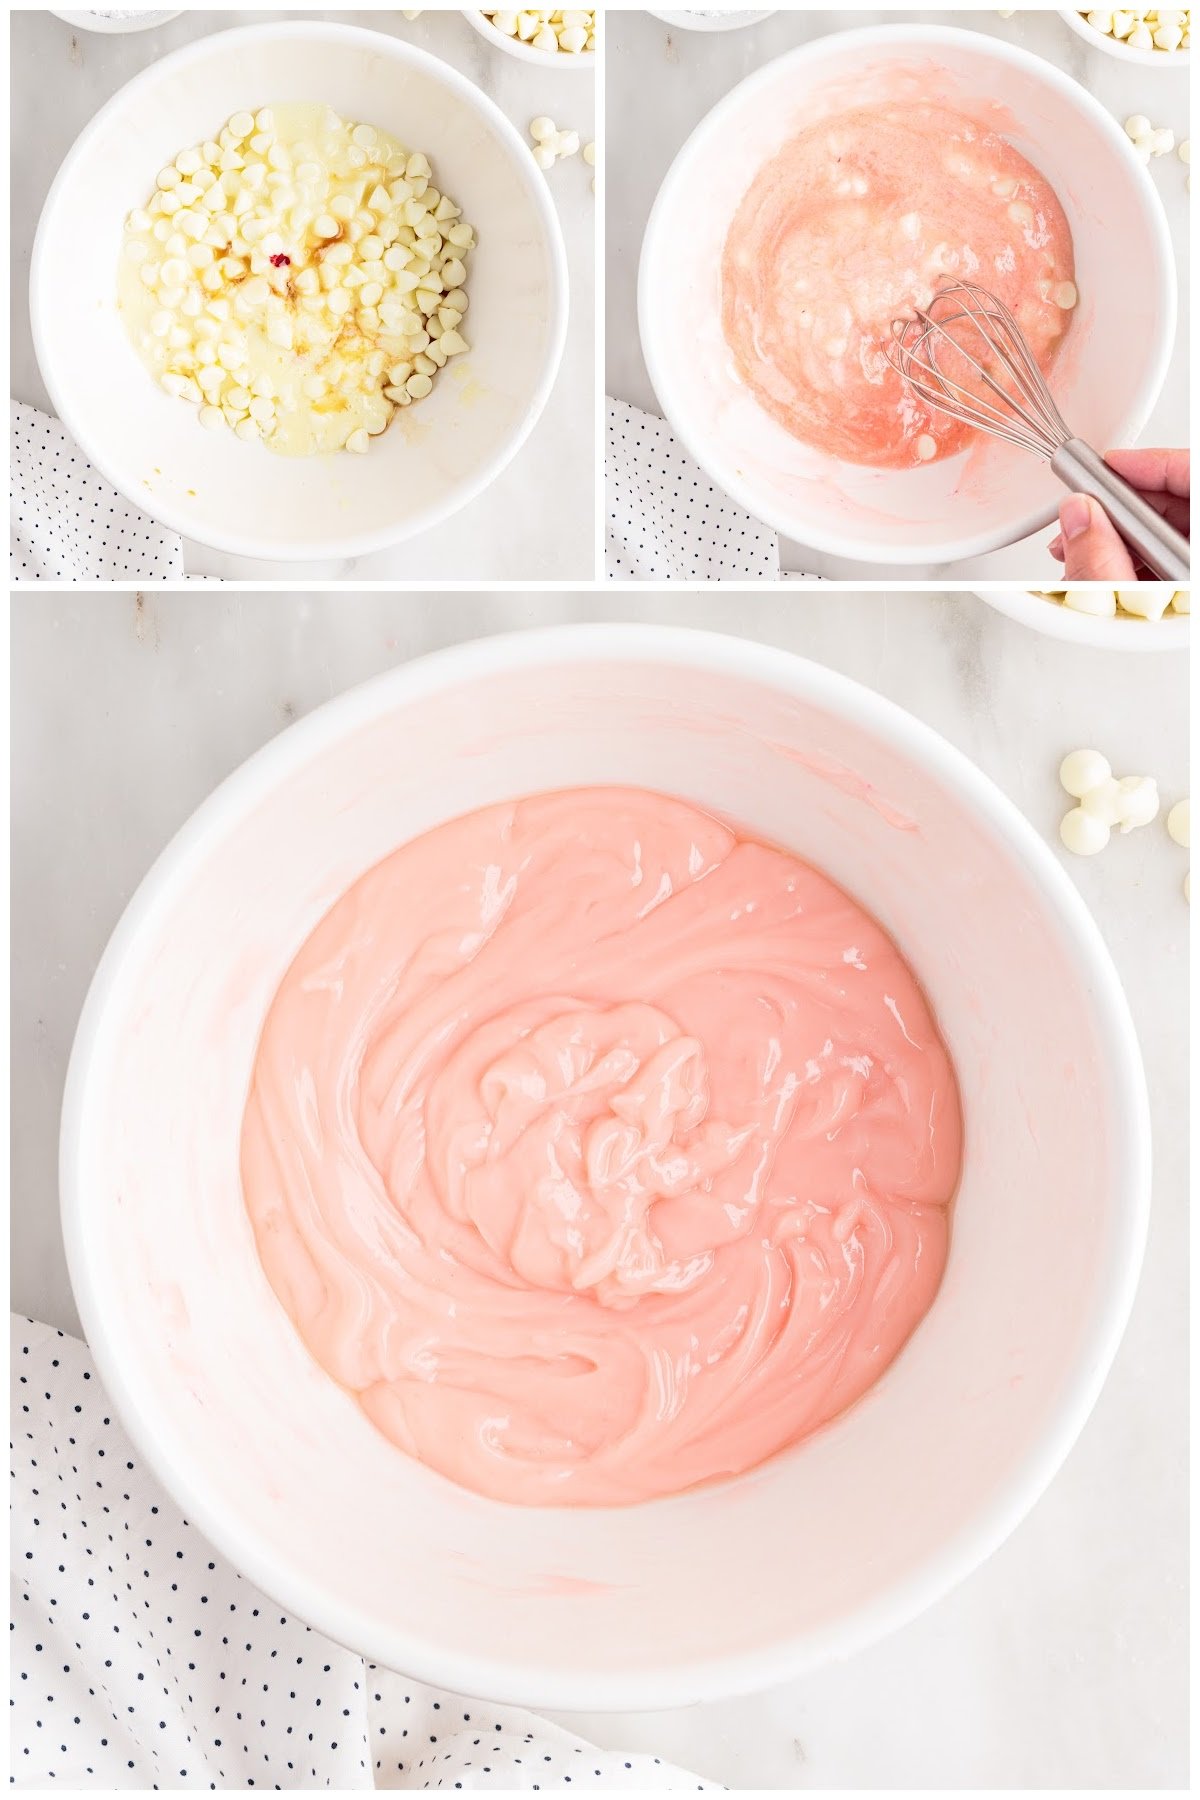 Added the strawberry extract and vanilla to make this bowl filled with pink strawberry truffle batter.